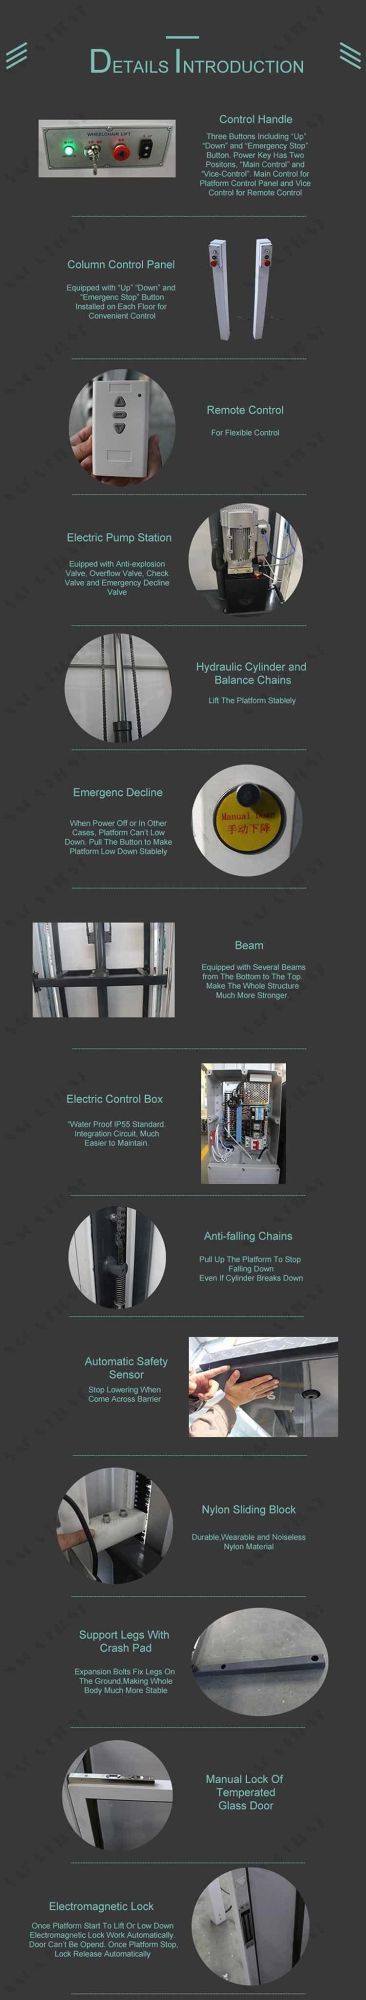 2 Persons Use Small Home Elevator Electric Disabled Wheelchair Lift